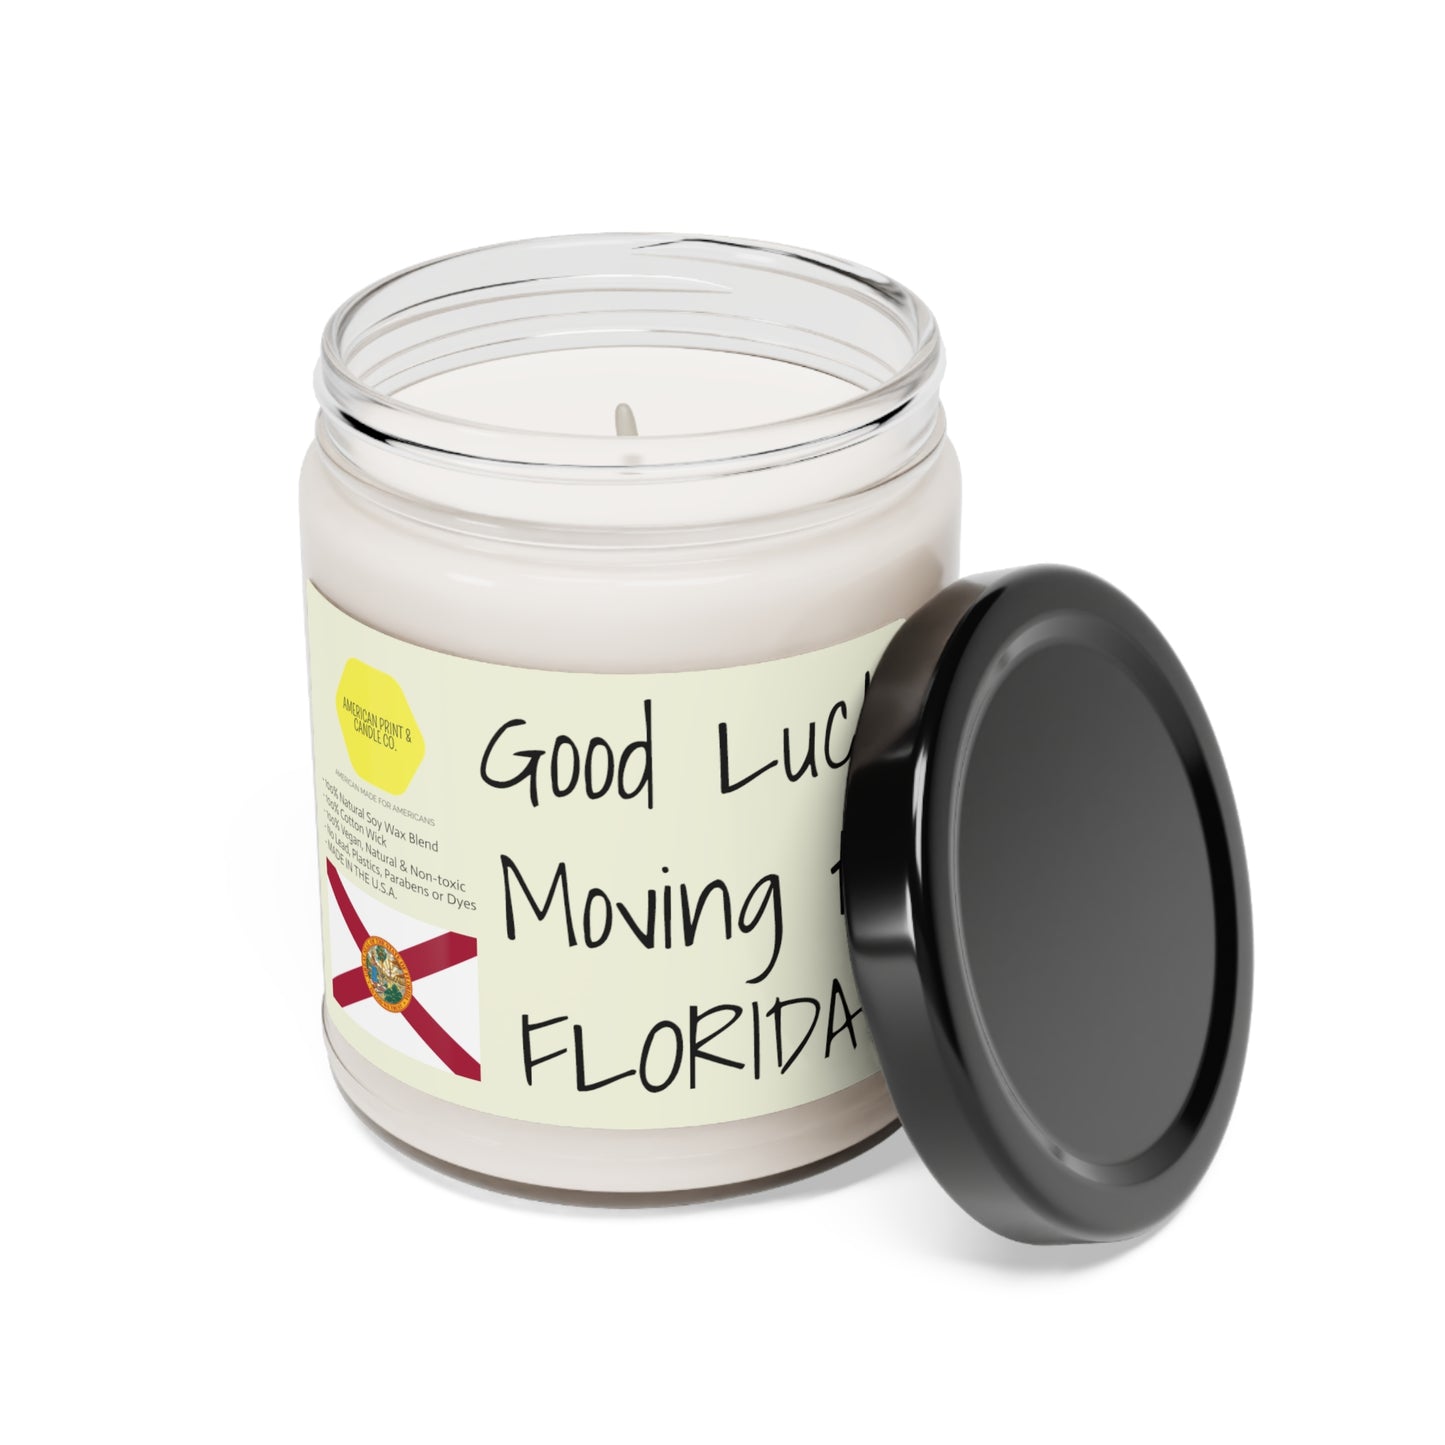 Good Luck moving to Florida scented Soy Candle, 9oz